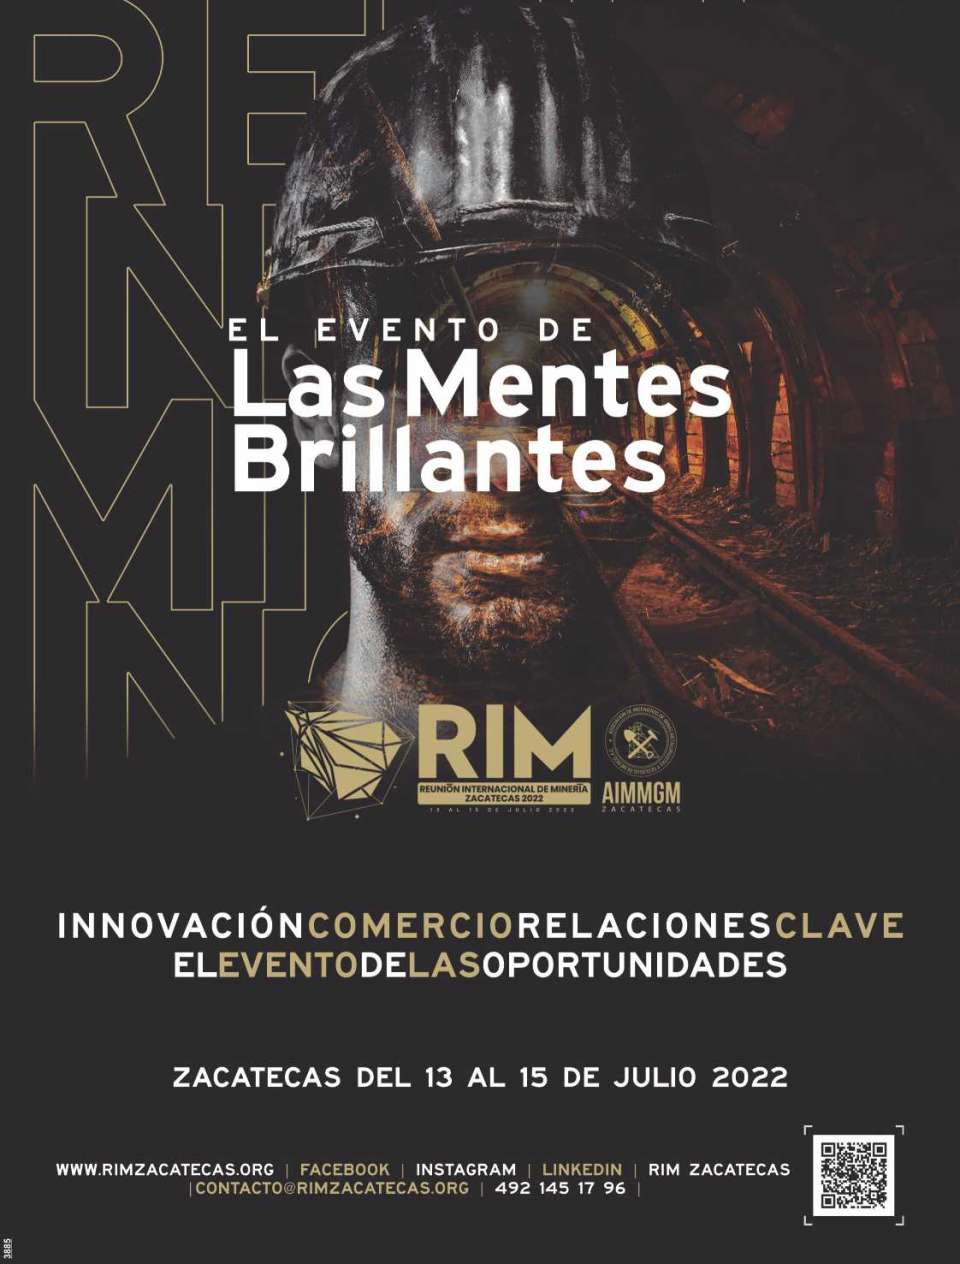 In Zacatecas from July 13 to 15, 2022, the best mining event in the region